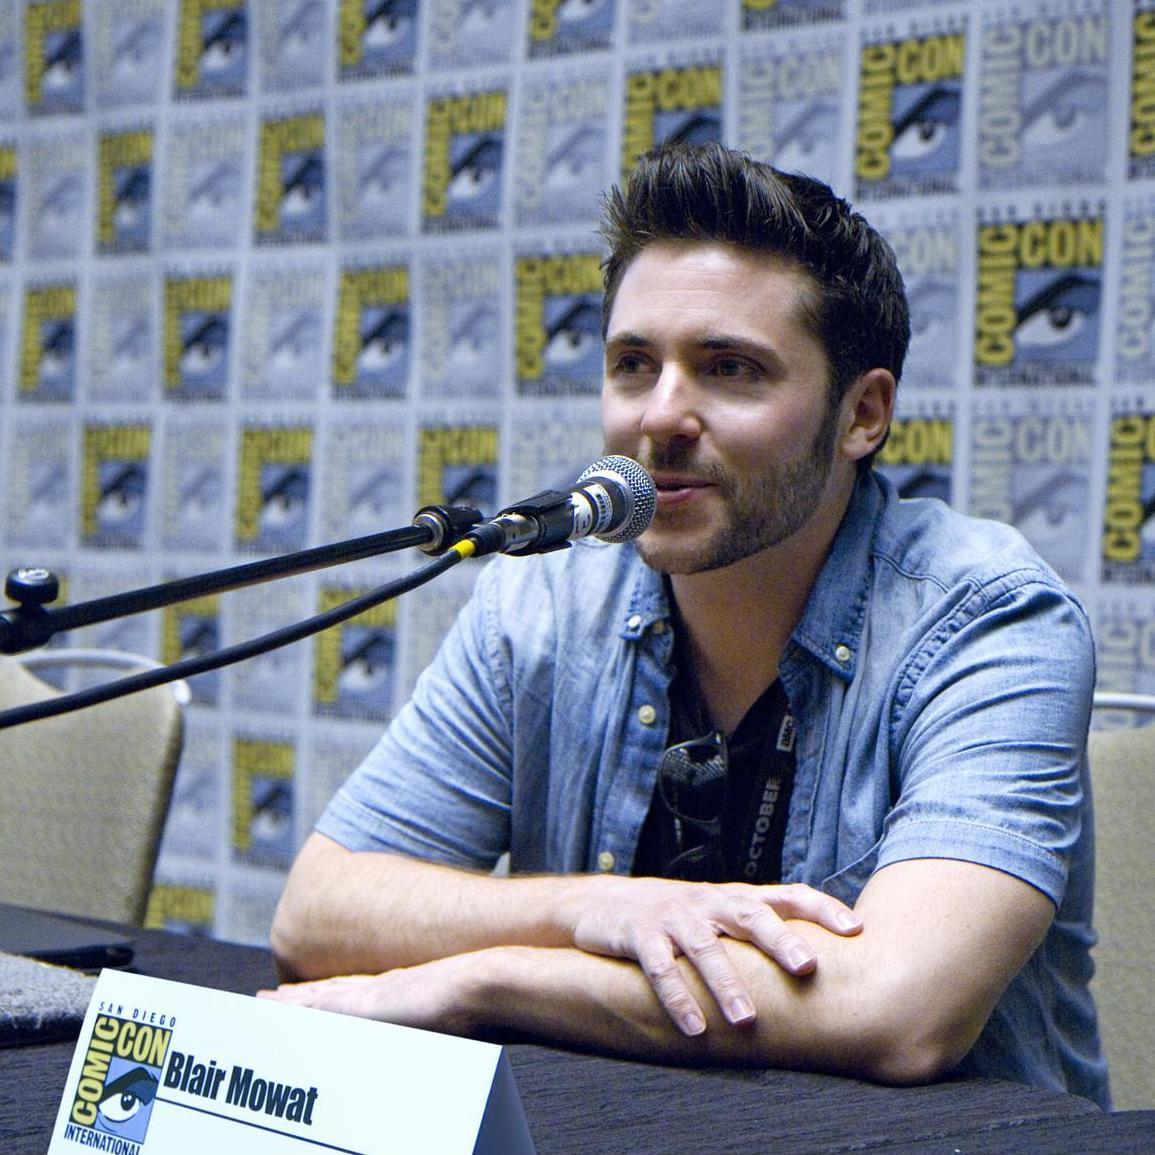 Blair lighting up the room during his panel at Comic-Con in San Diego
2018